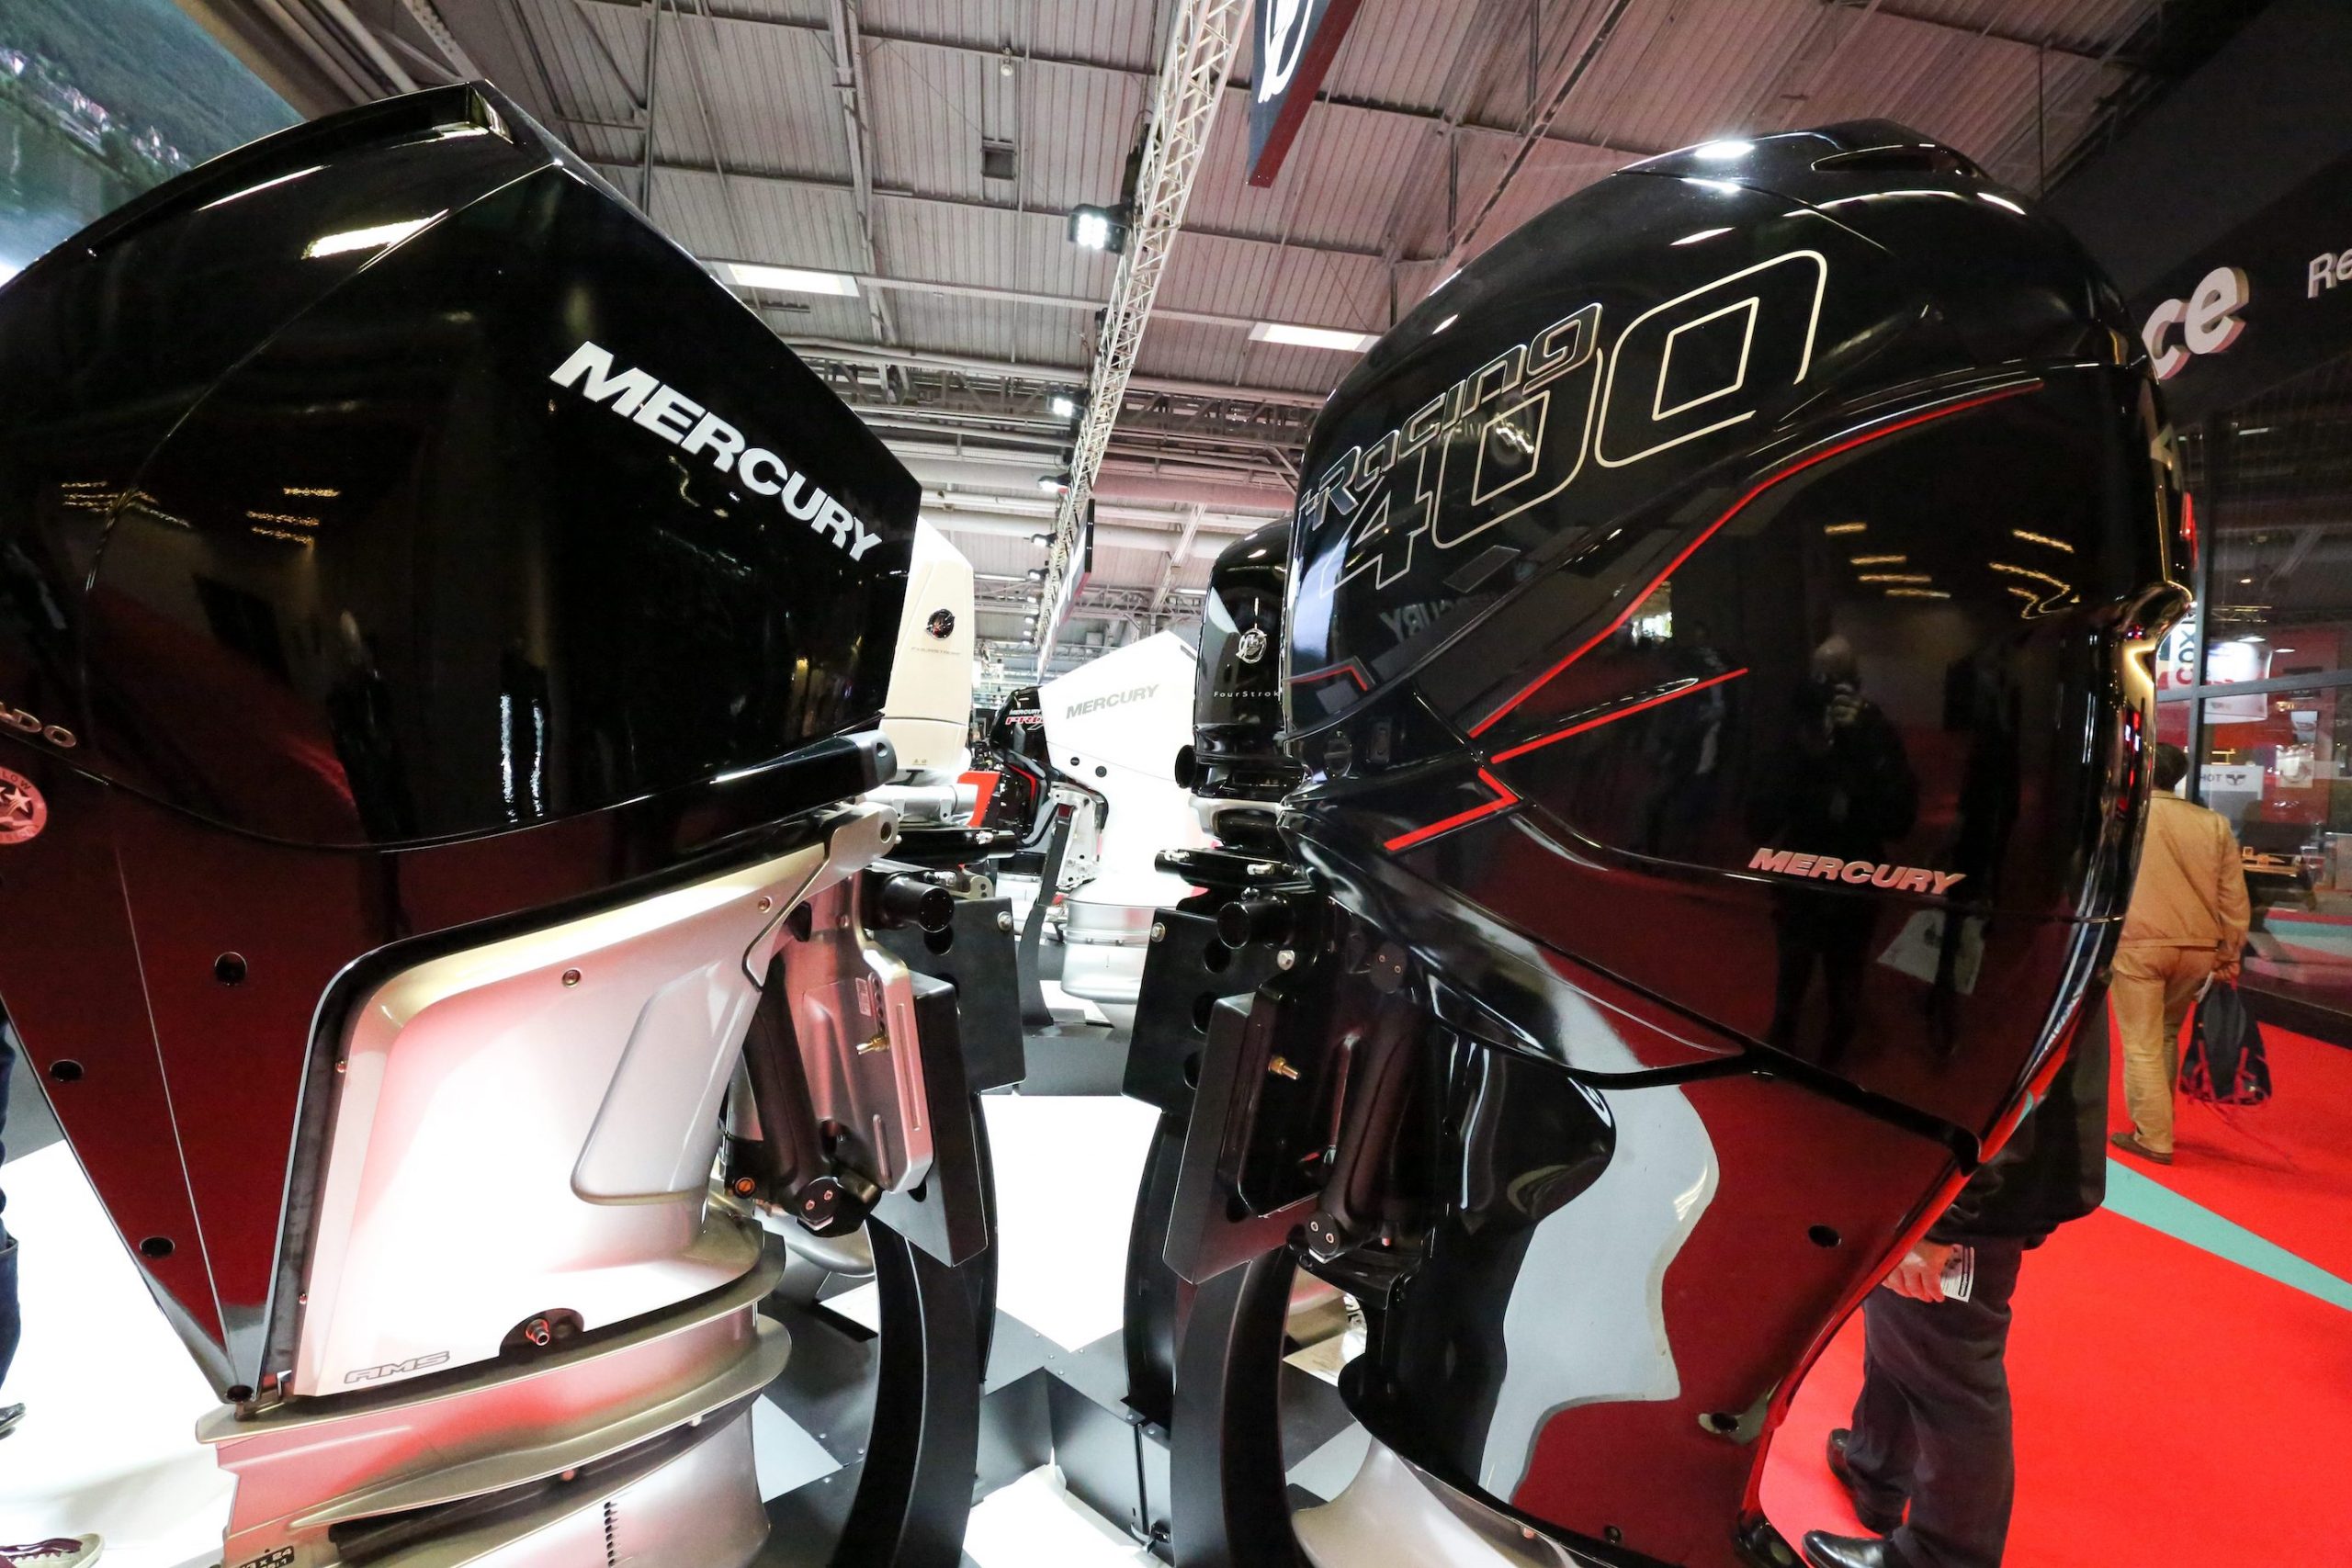 A picture taken on December 9, 2018 shows boat motors of the manufacturer Mercury, rival to Yamaha, on display during the Paris International Boat Show